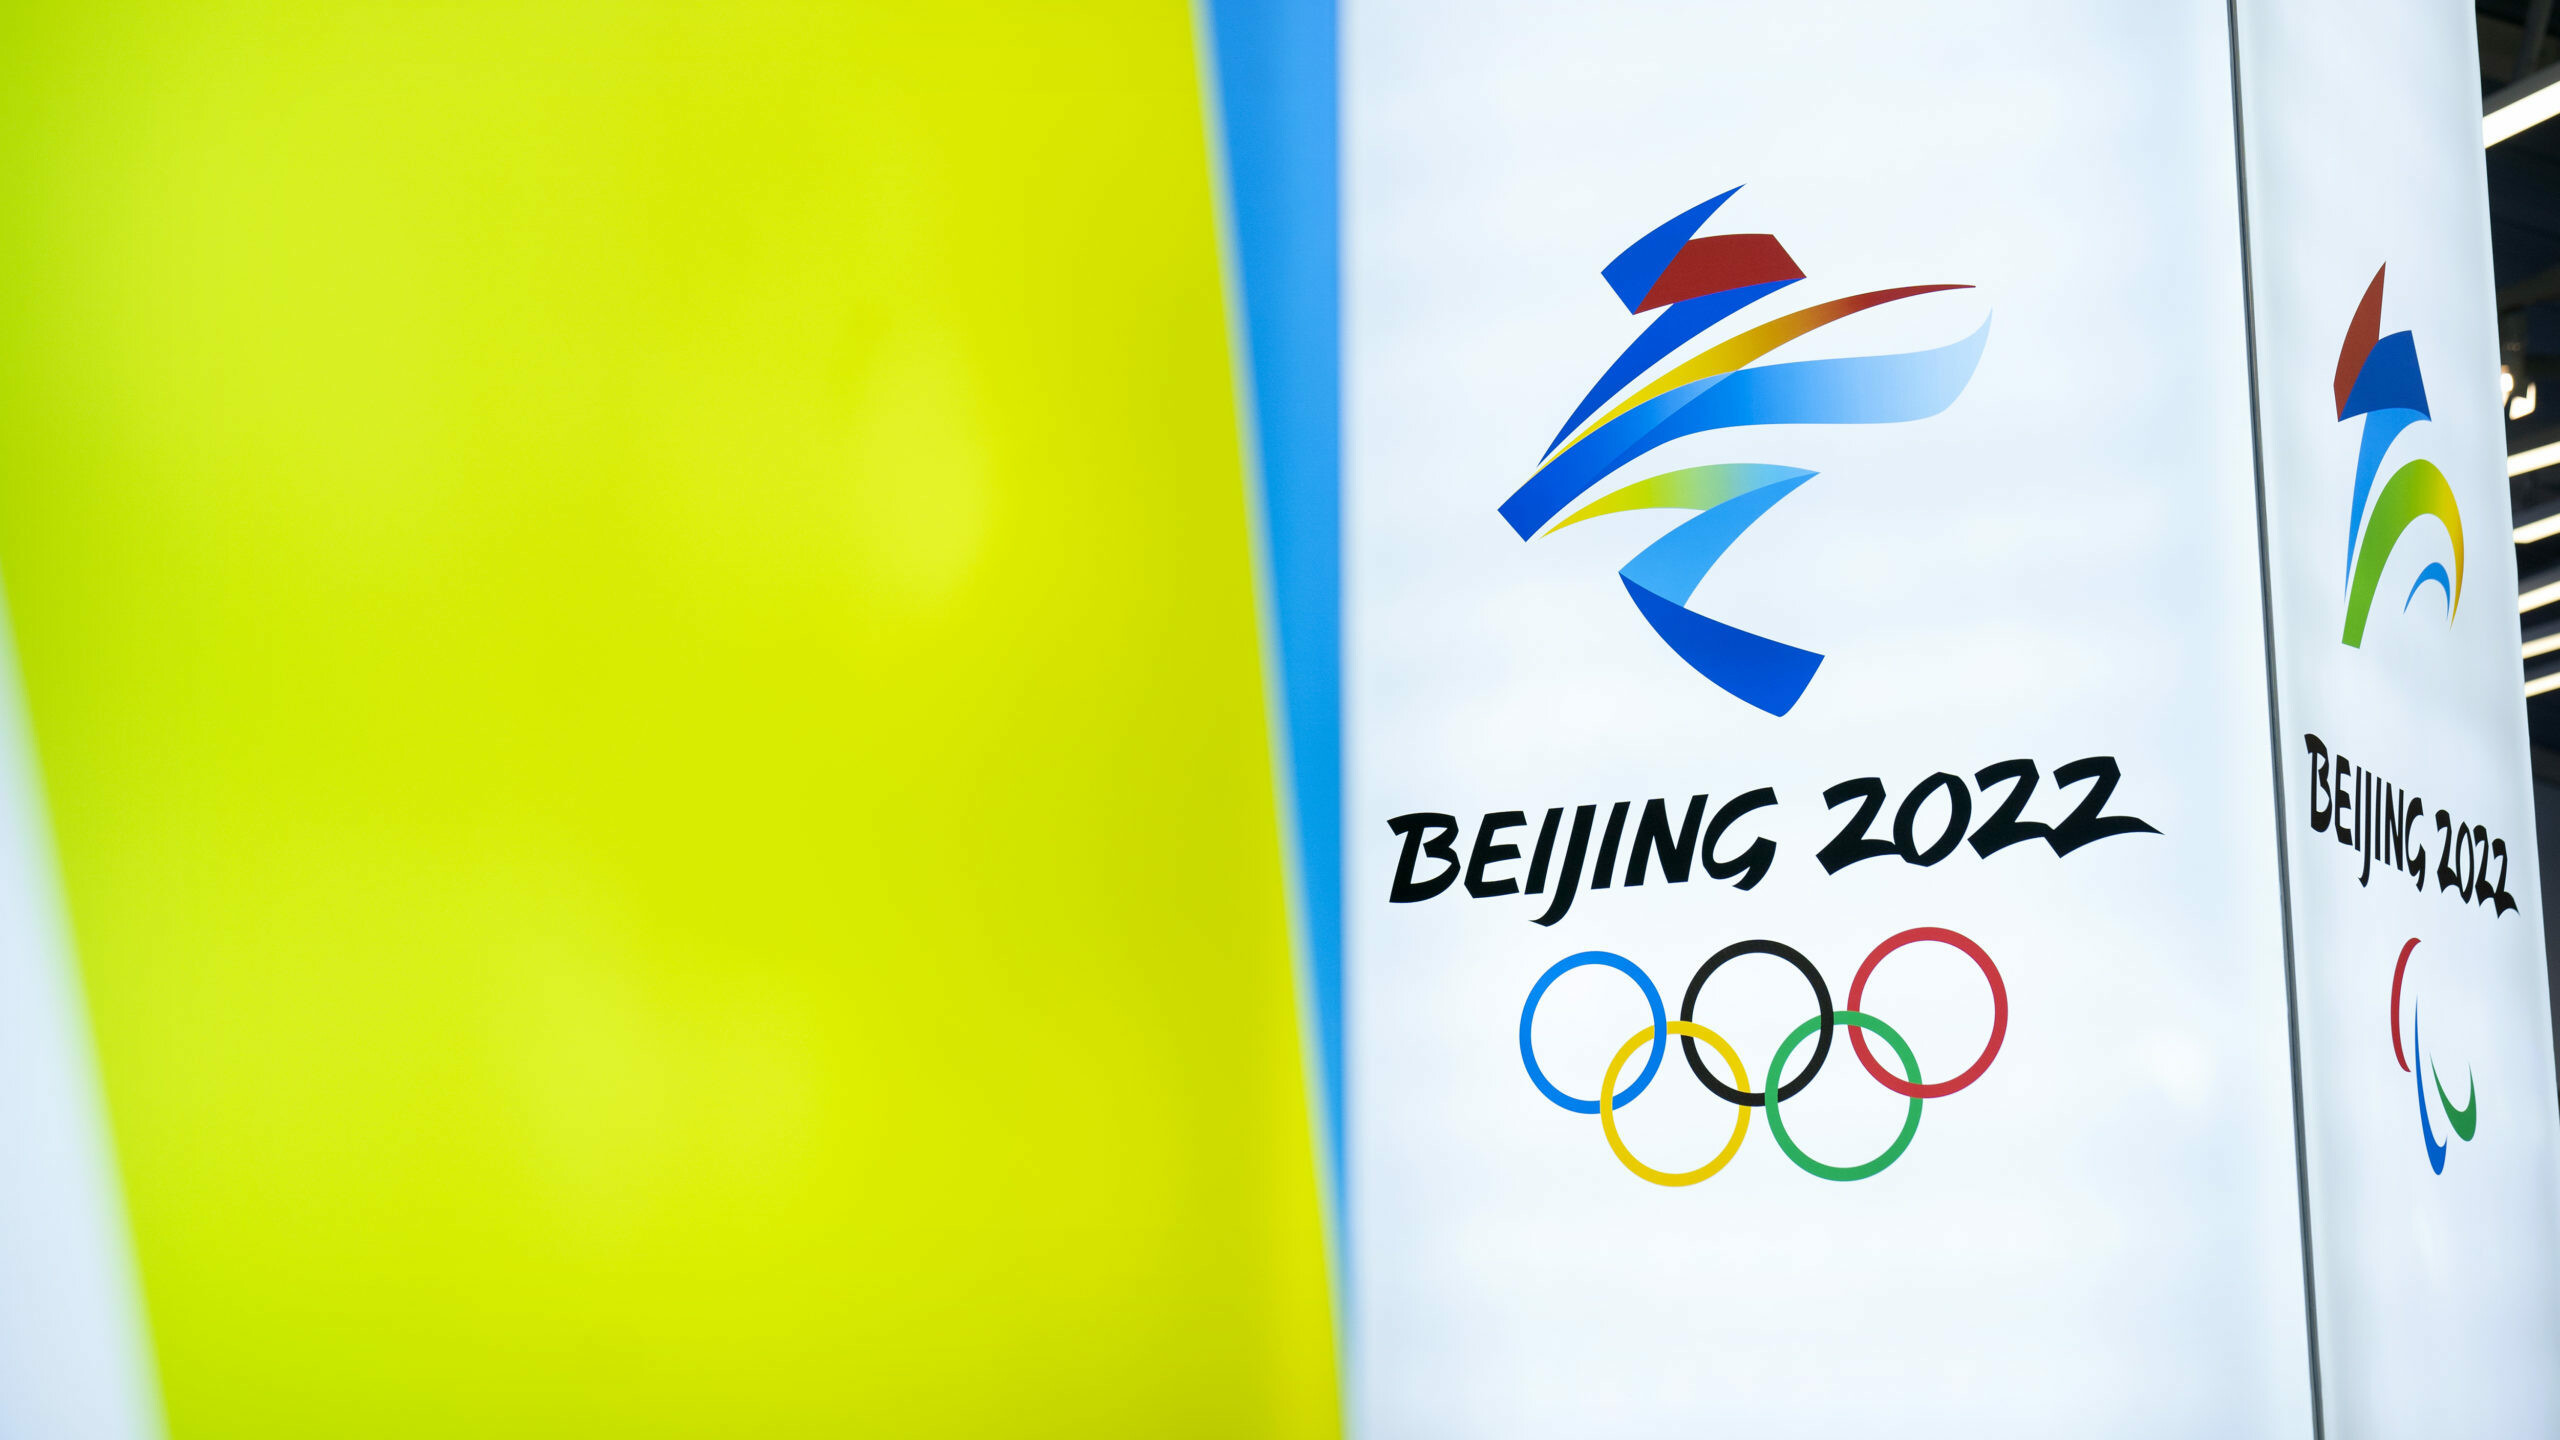 2022 Beijing Olympics, Lesser-known facts, Fascinating trivia, Behind-the-scenes stories, 2560x1440 HD Desktop